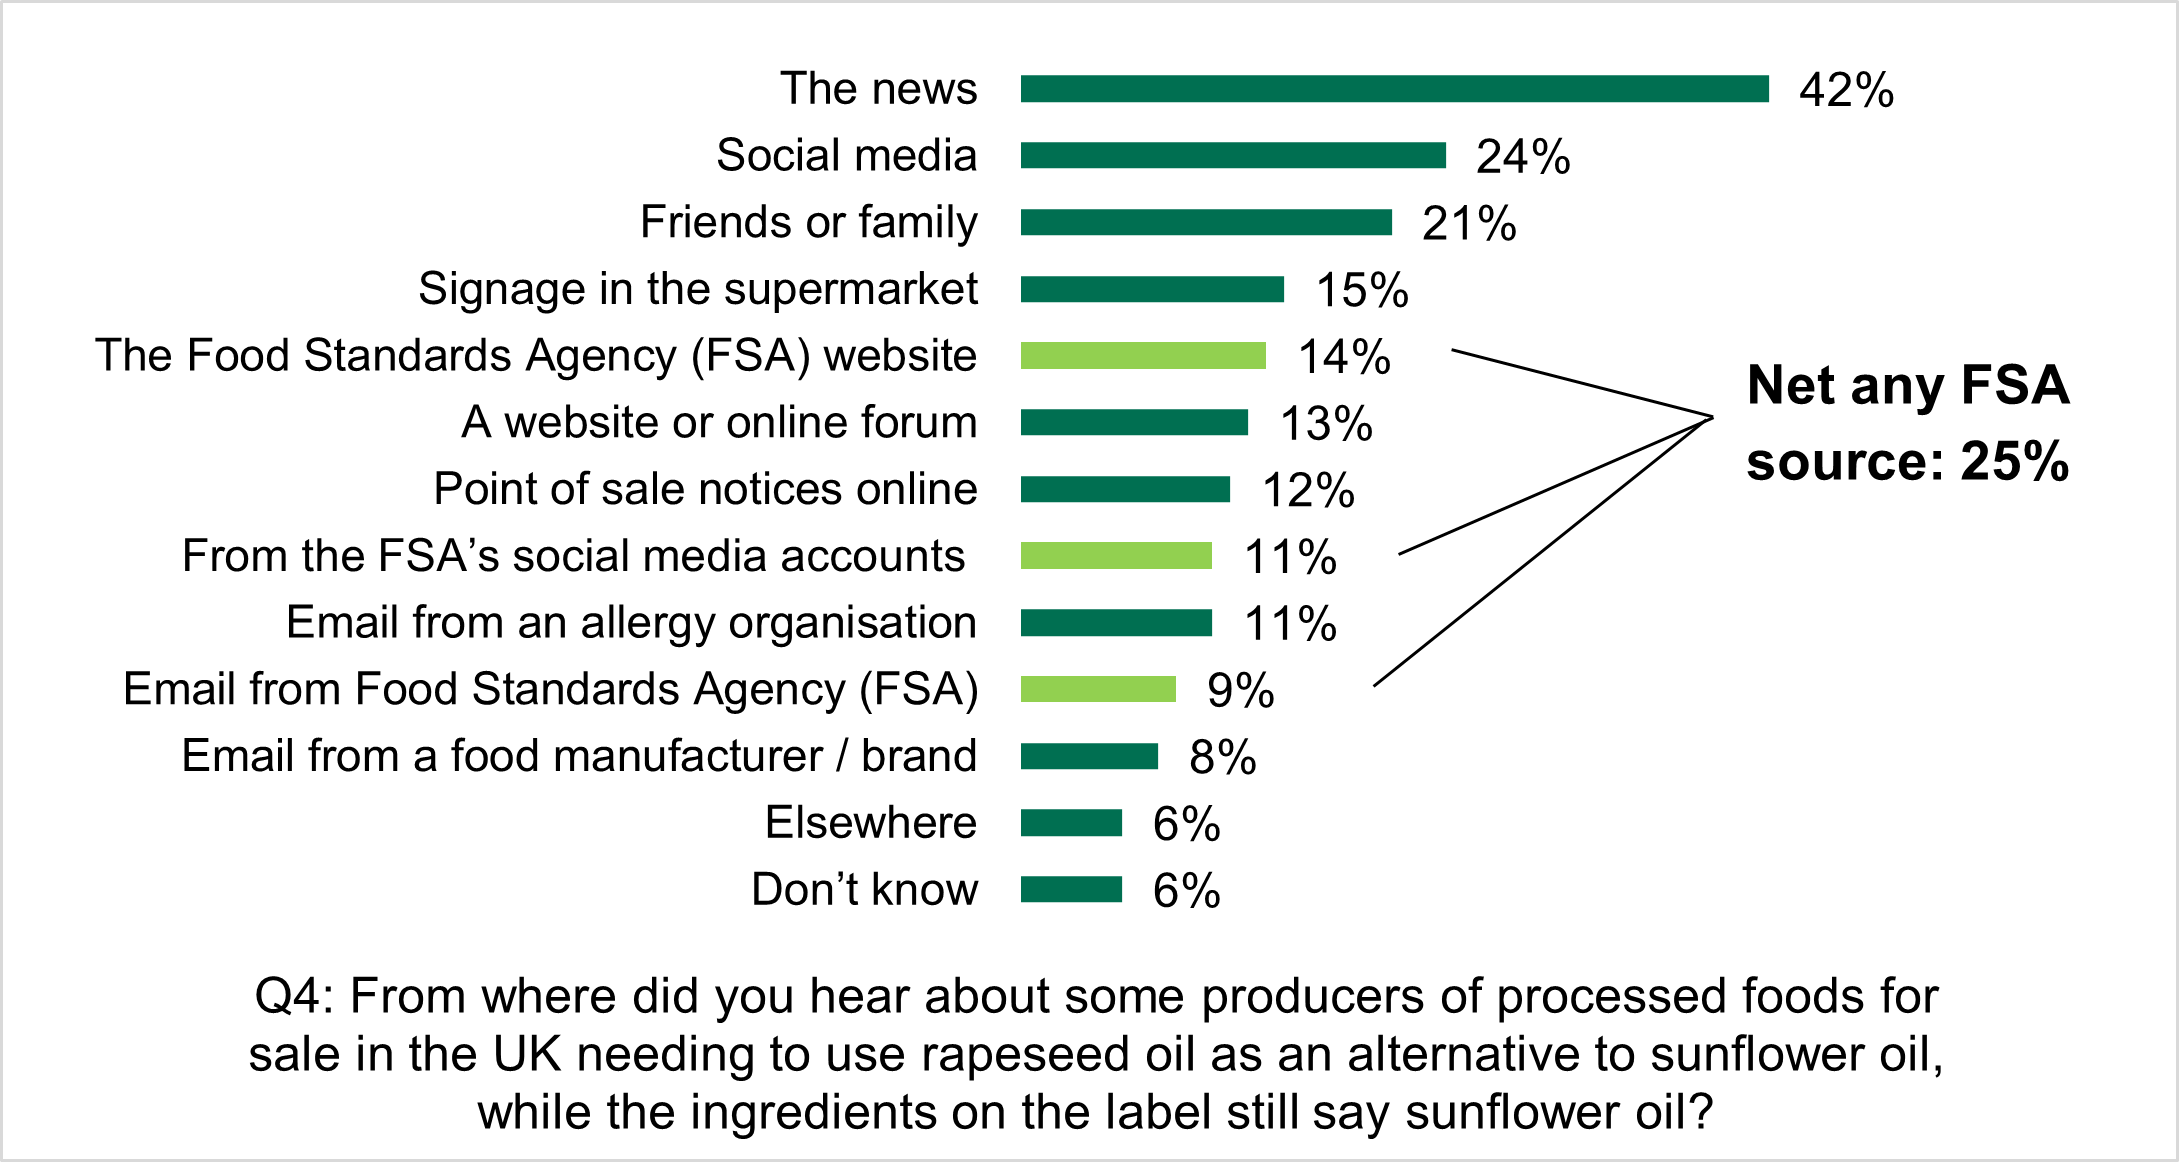 Where consumers who are aware of oil substitutions got there information from, 25% from net any FSA source and 42% from the news.